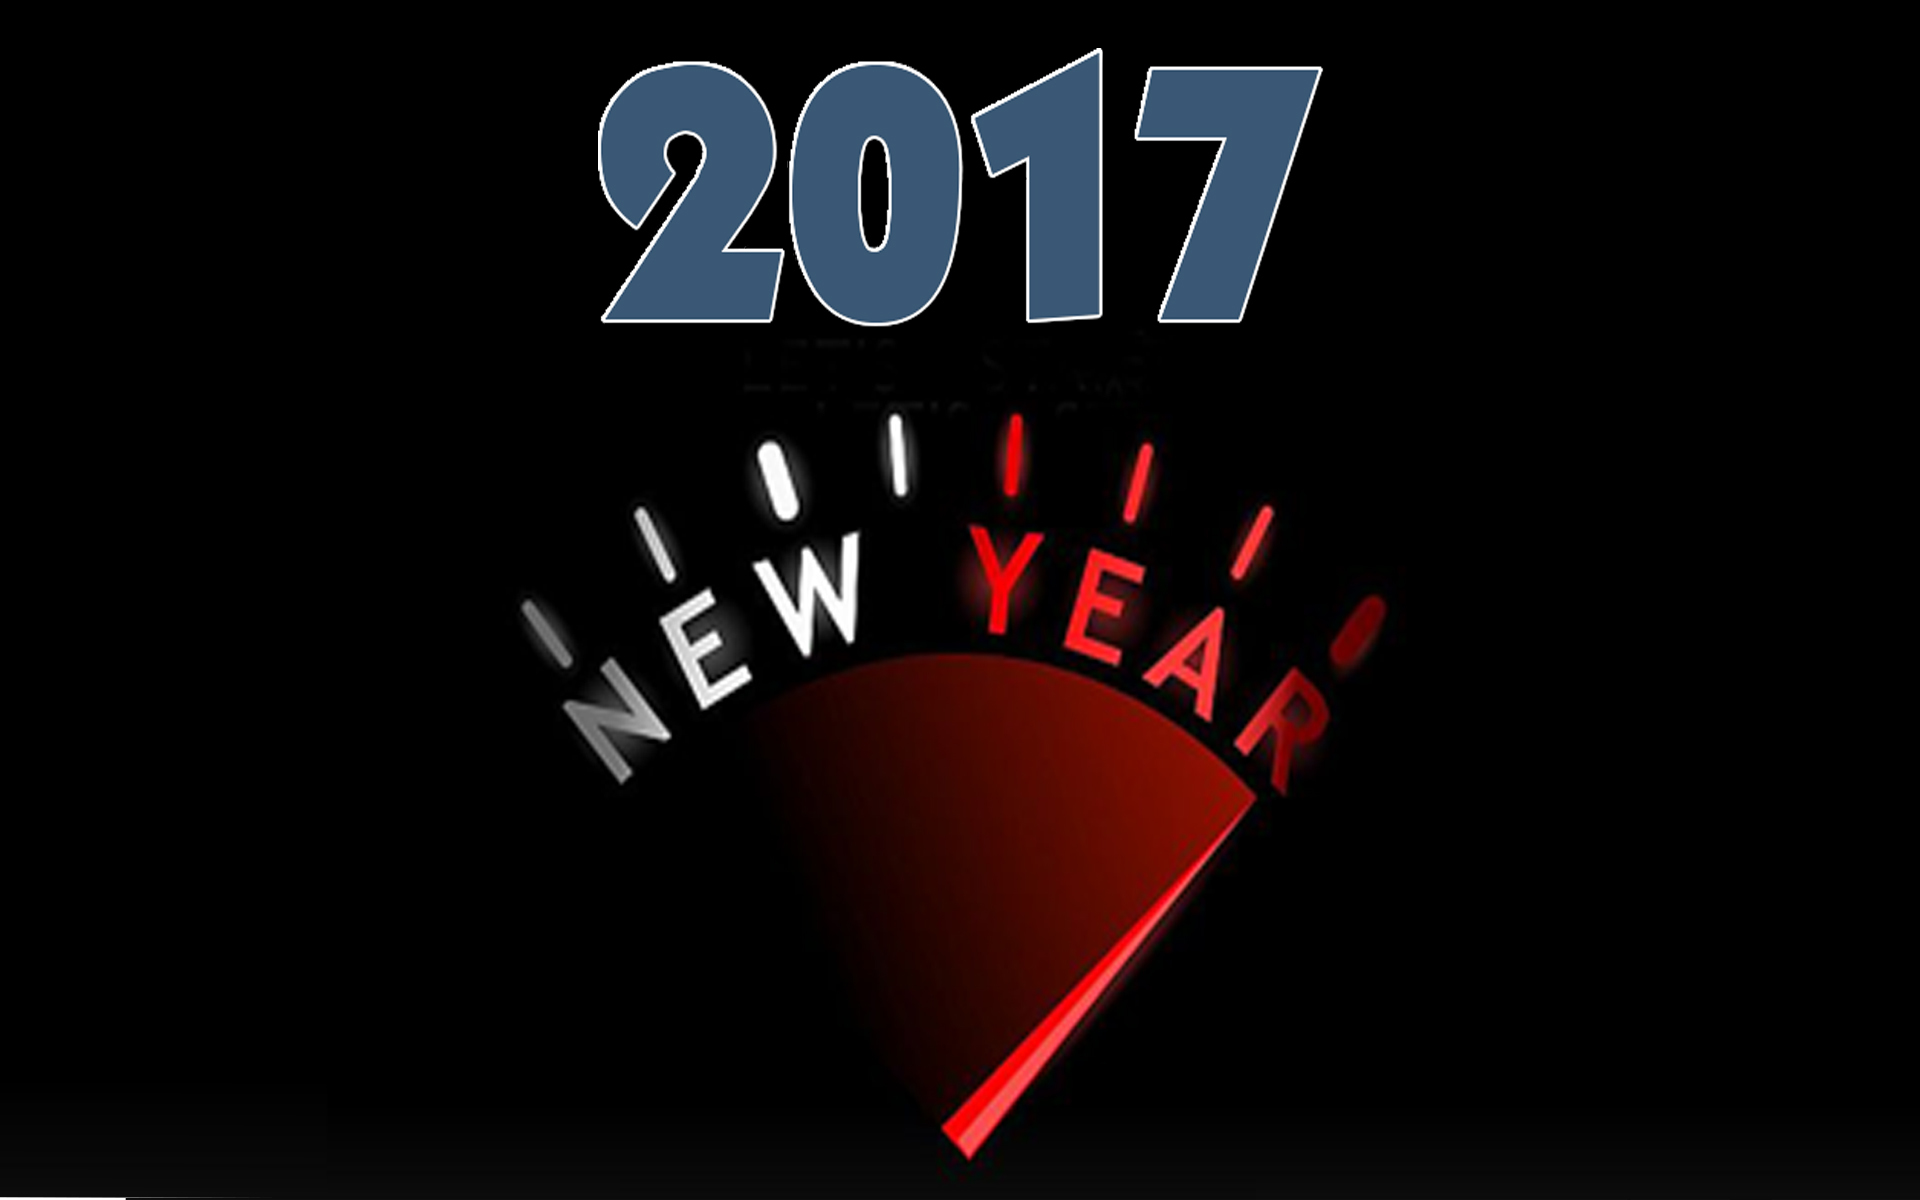 Happy New Year 2017 Wallpapers Images Photos Pictures ...